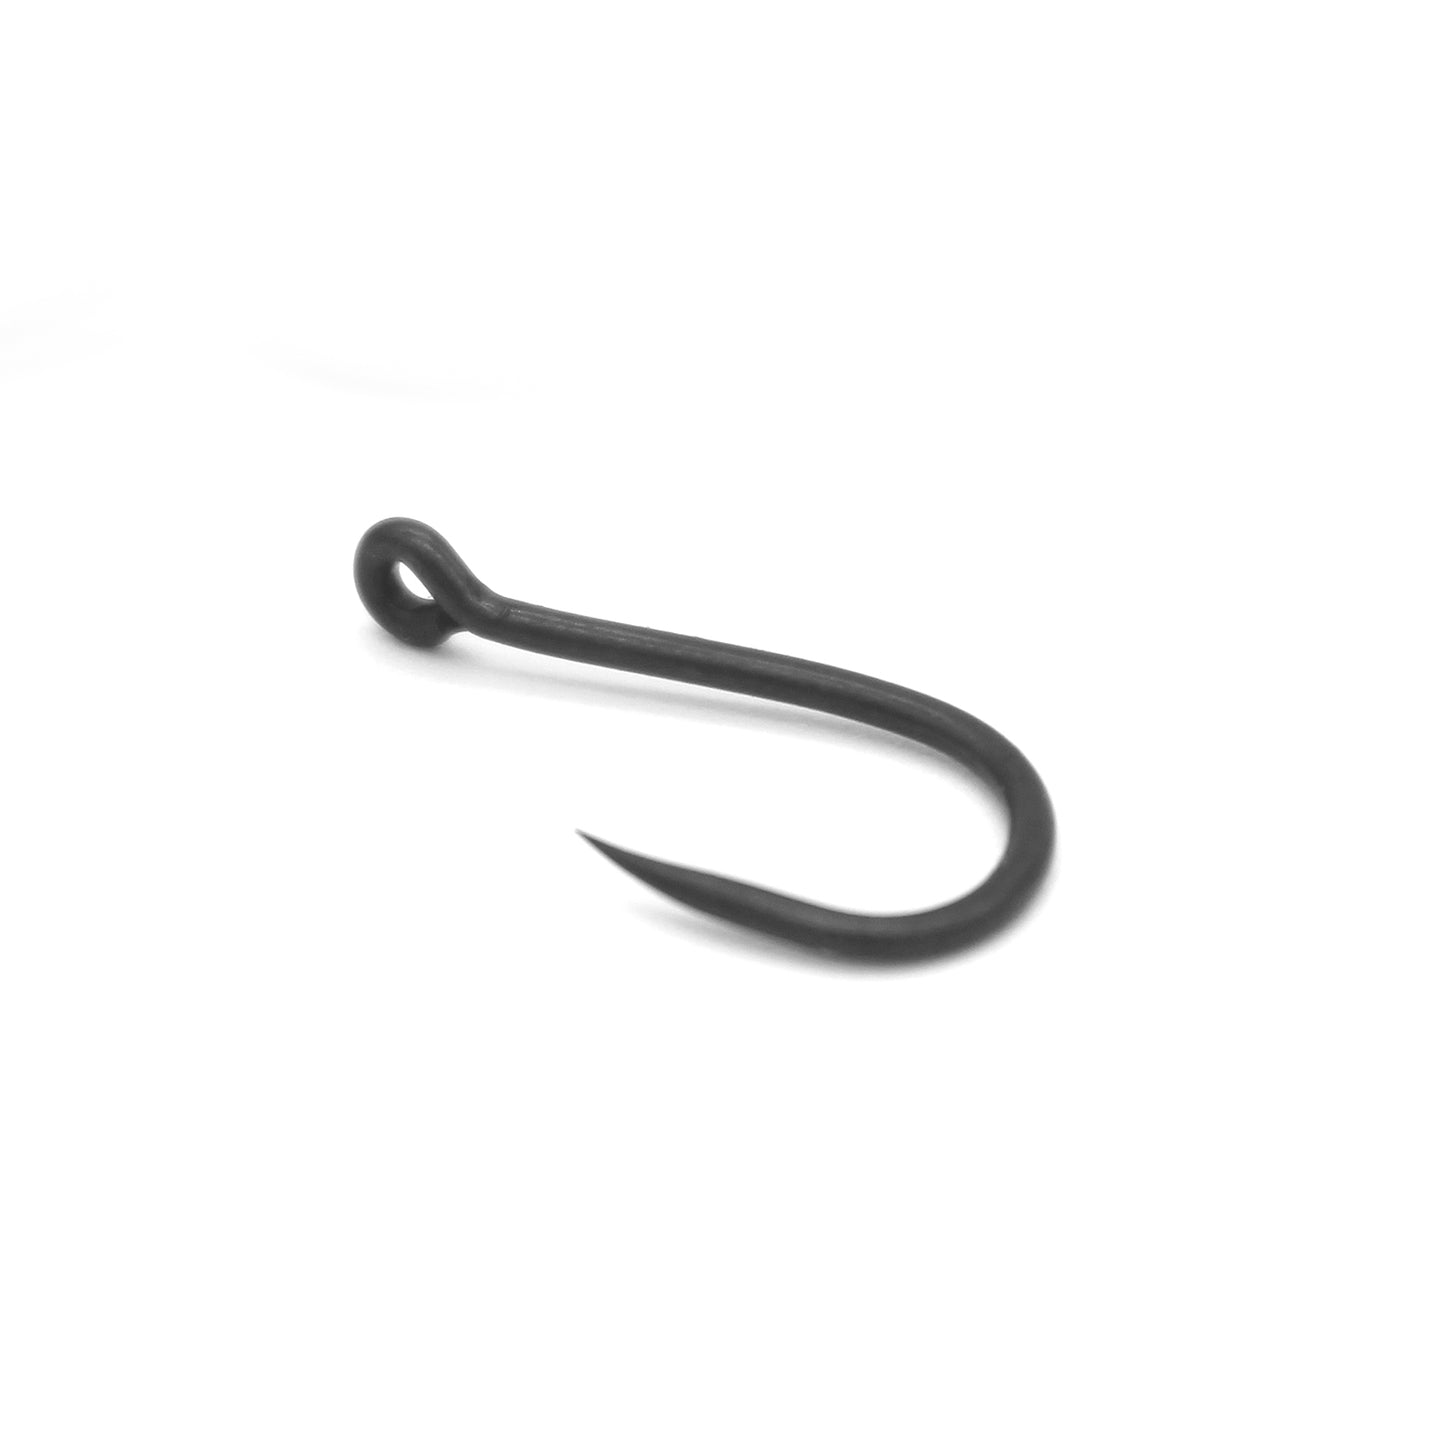 Deception Angling Chod CRK Hooks for Fishing